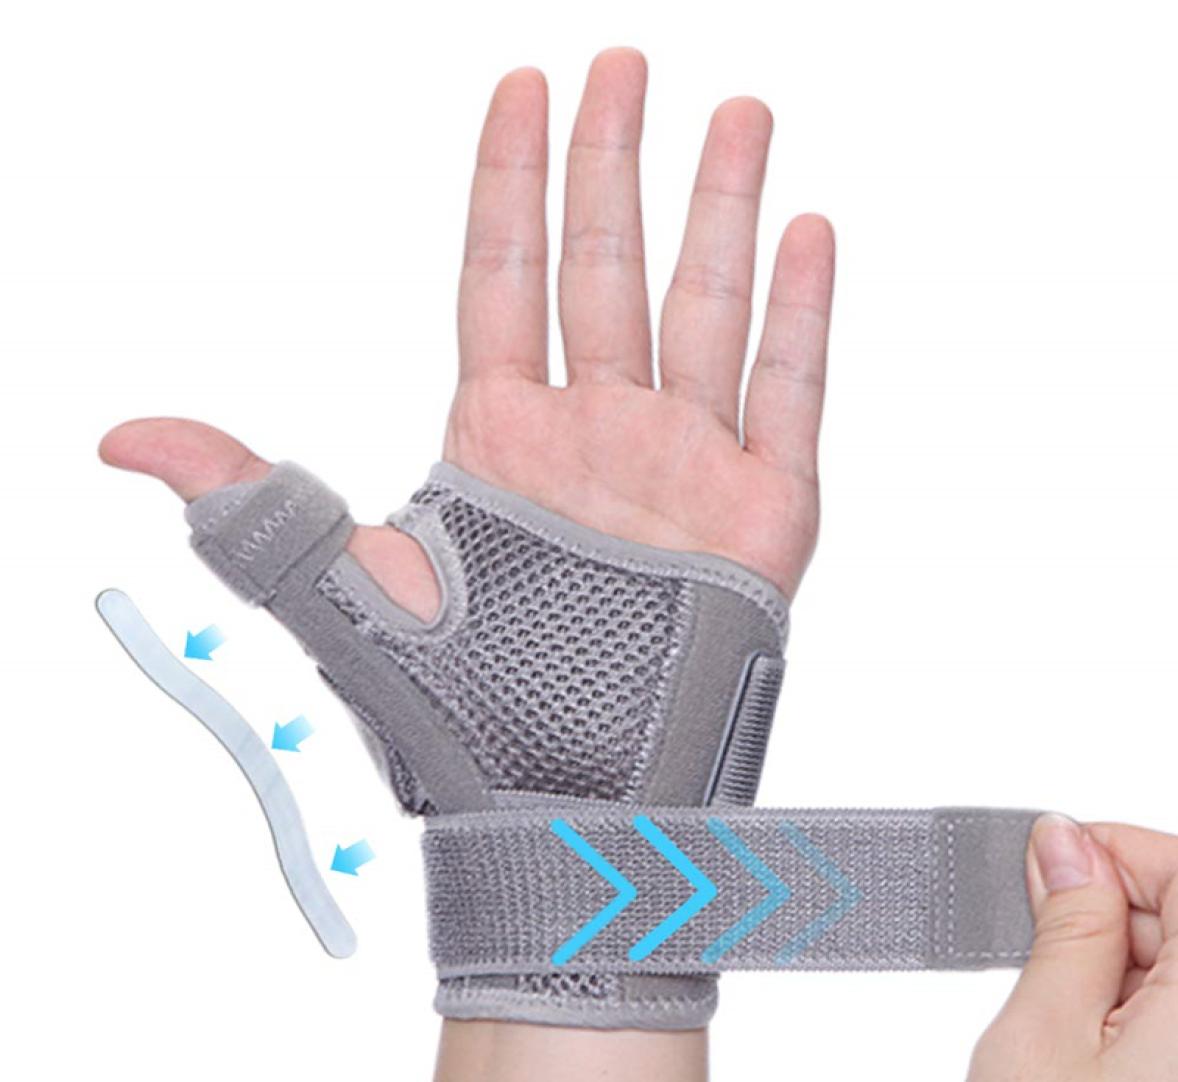 

1PC Thumb Spica Splint Stabilizer Wrist Support Brace Protector Carpal Tunnel Tendonitis Pain Relief Right Left Hand Immobilizer2844633, Red